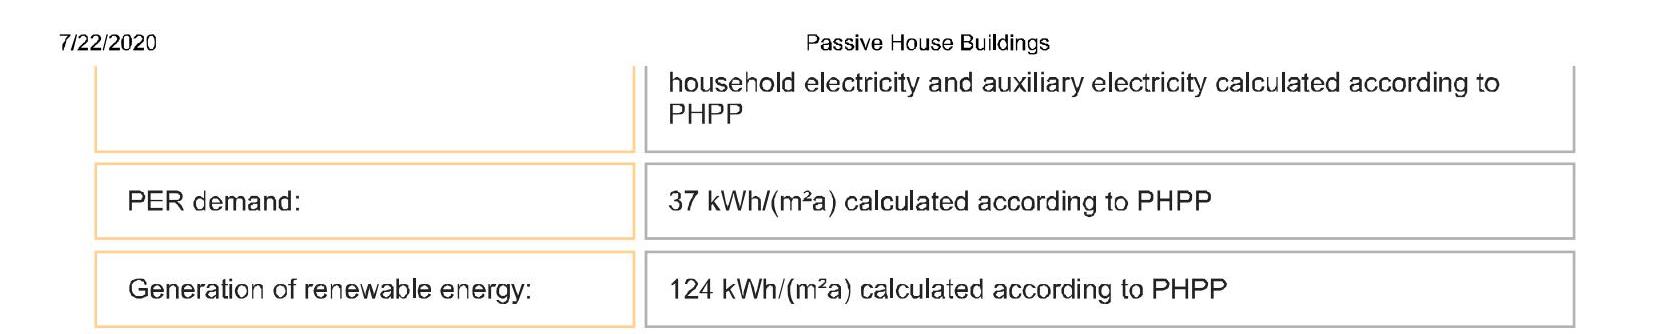 Passive House Buildings_Page_33.jpg